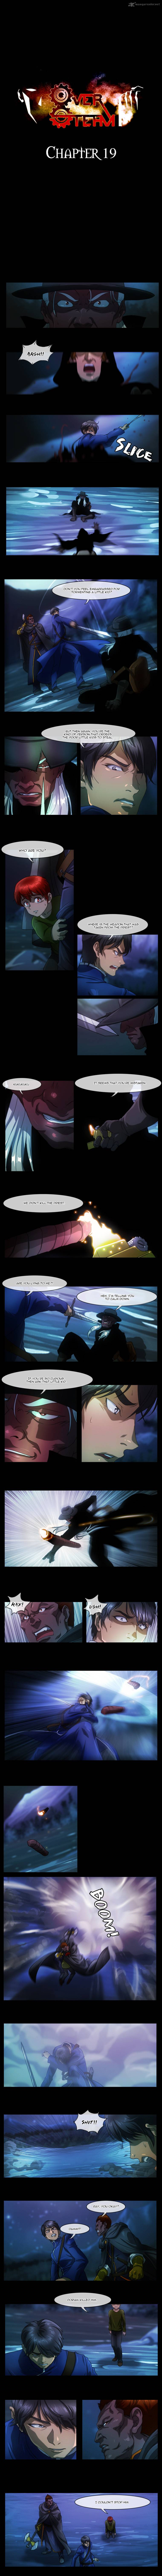 Over Steam Chapter 19 Page 2